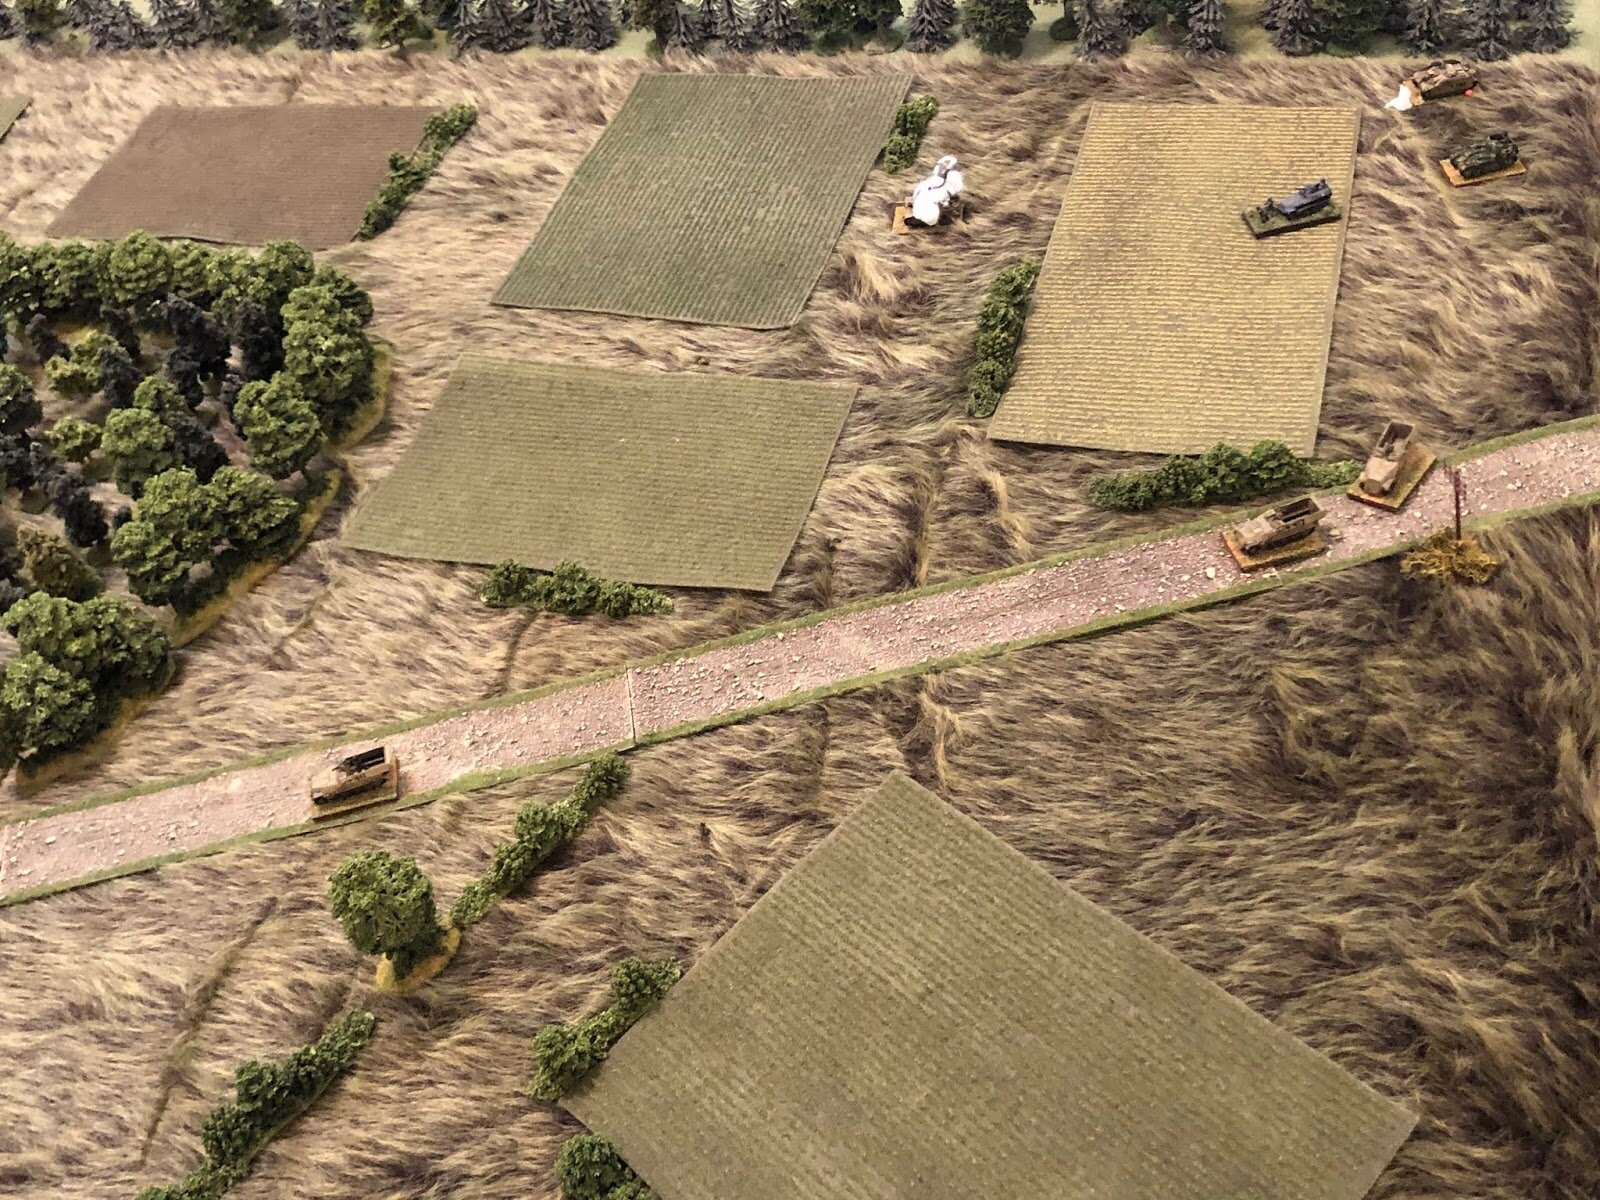  A little further south (the German armor is at top right), the German PC in the halftracks pushes up the road (far left, from right), though he has yet to spot any enemy forces. 